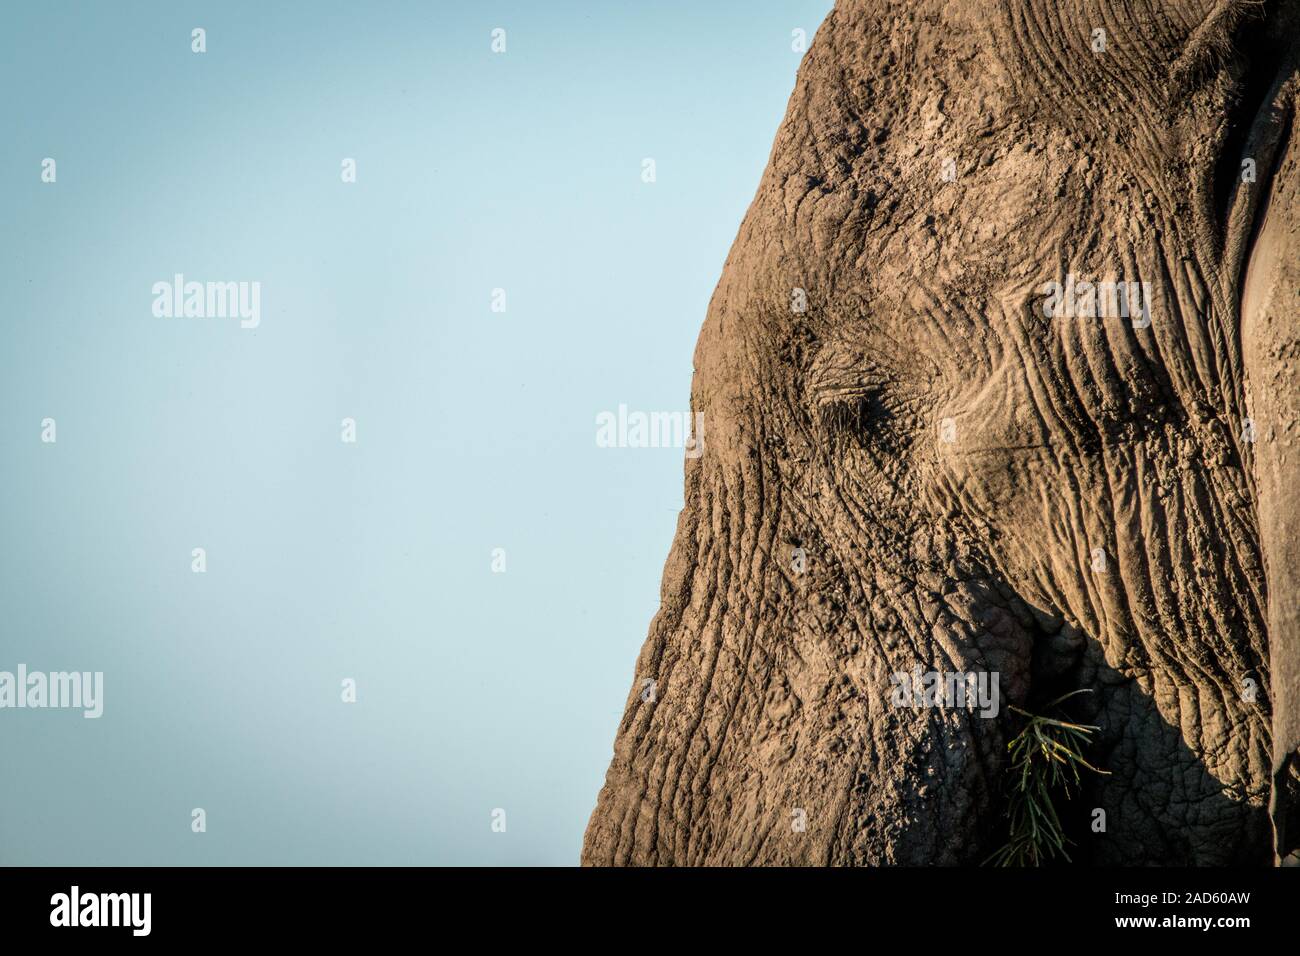 Side profile of the face of an Elephant. Stock Photo